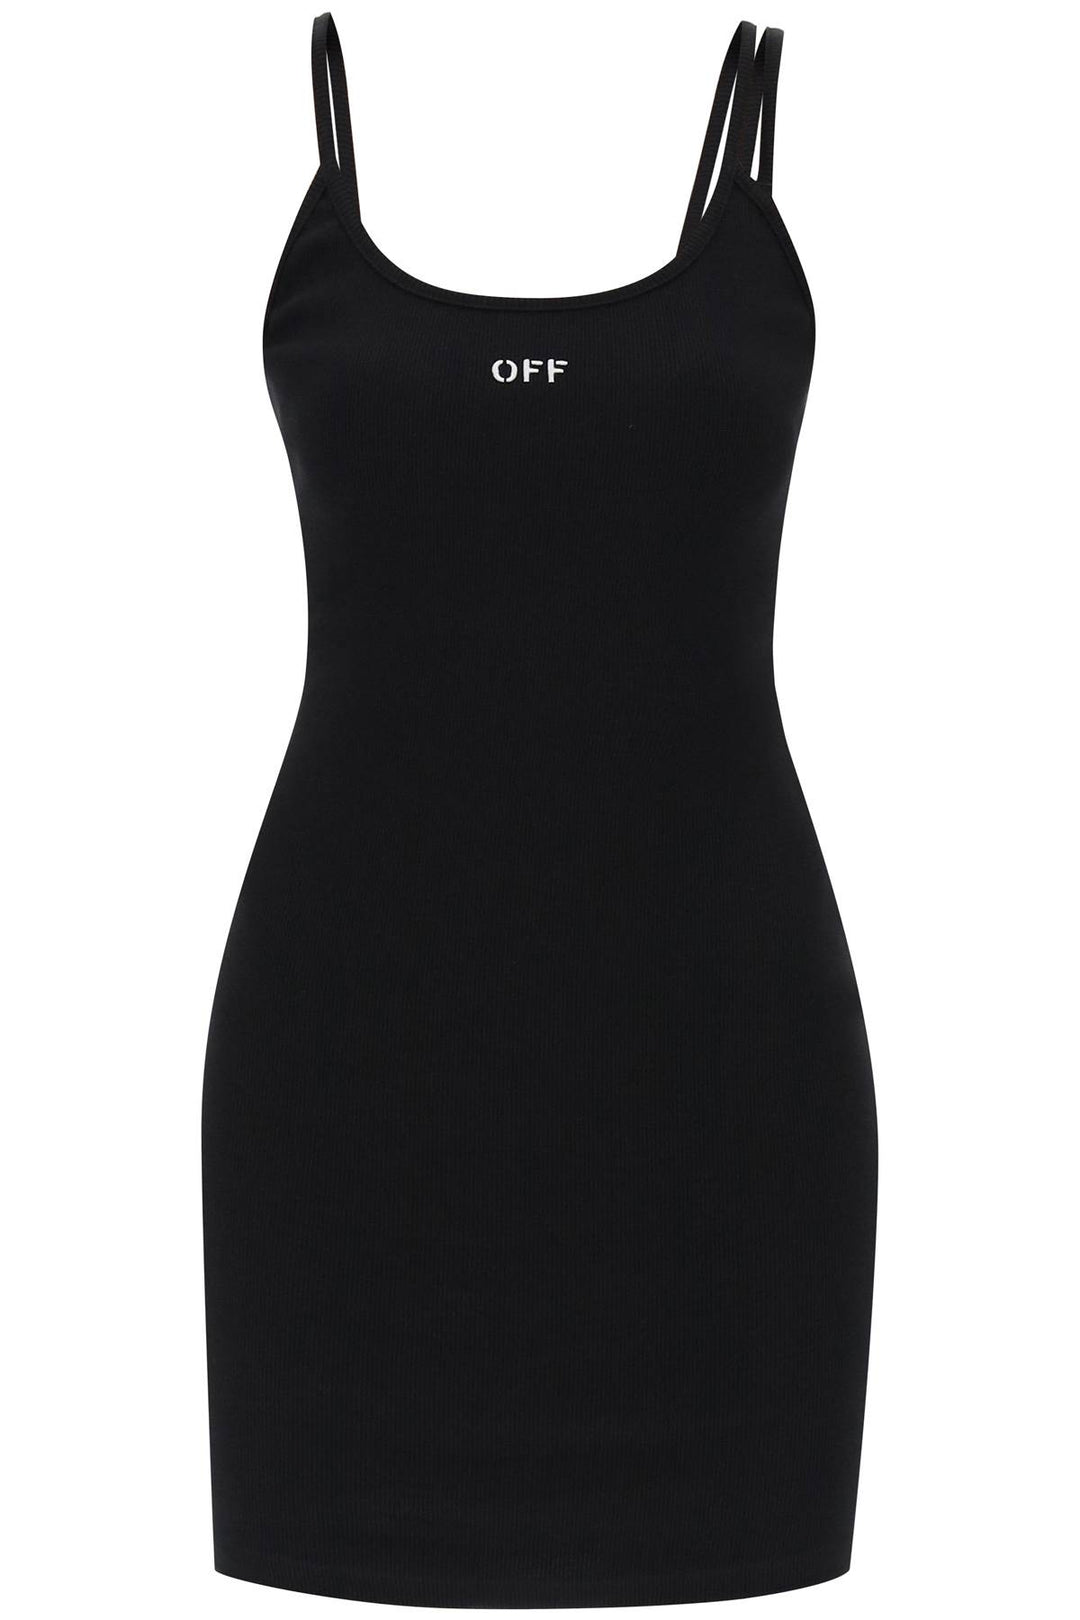 Off White Tank Dress With Off Embroidery   Black